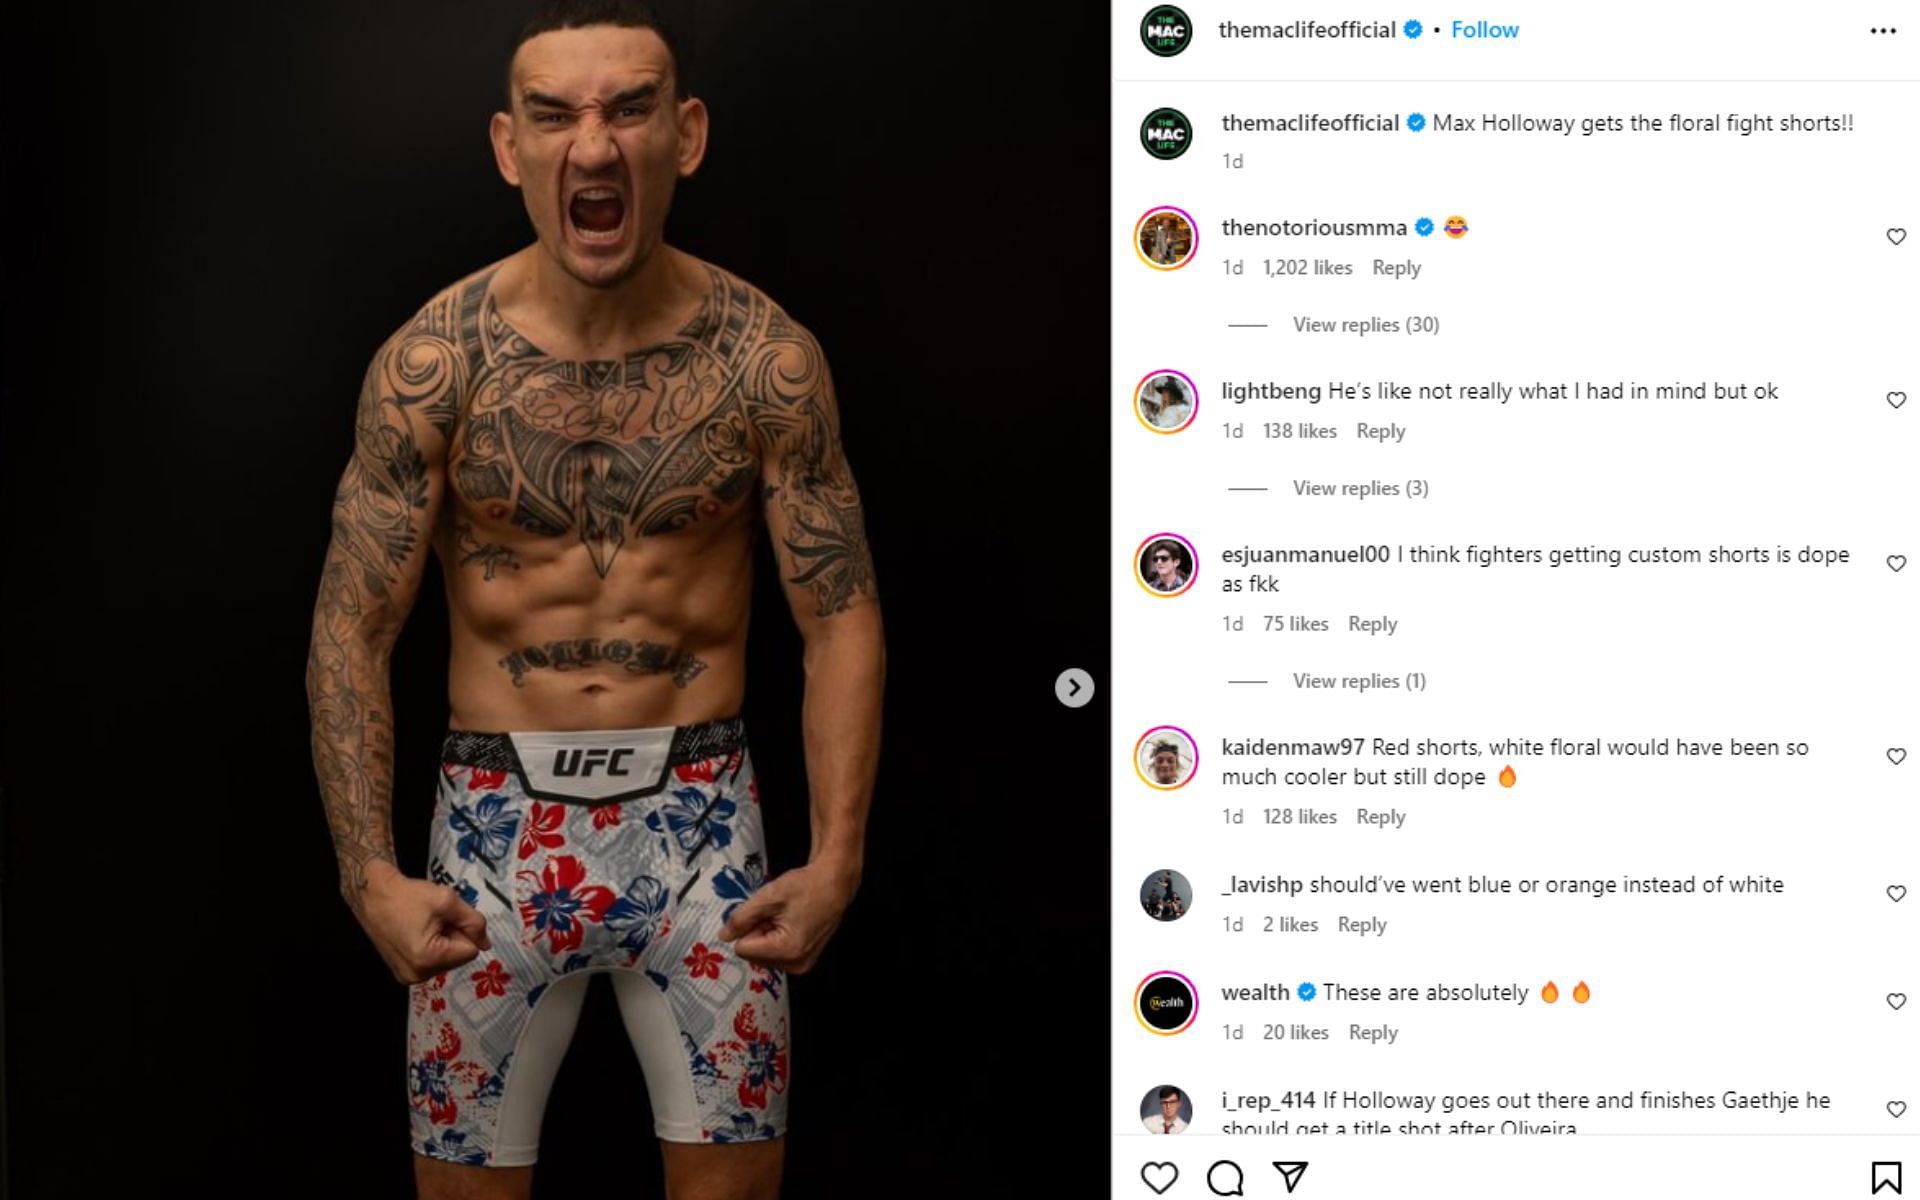 Conor McGregor&#039;s comment (top comment) about Holloway&#039;s floral shorts [Image Courtesy: @themaclifeofficial on Instagram]